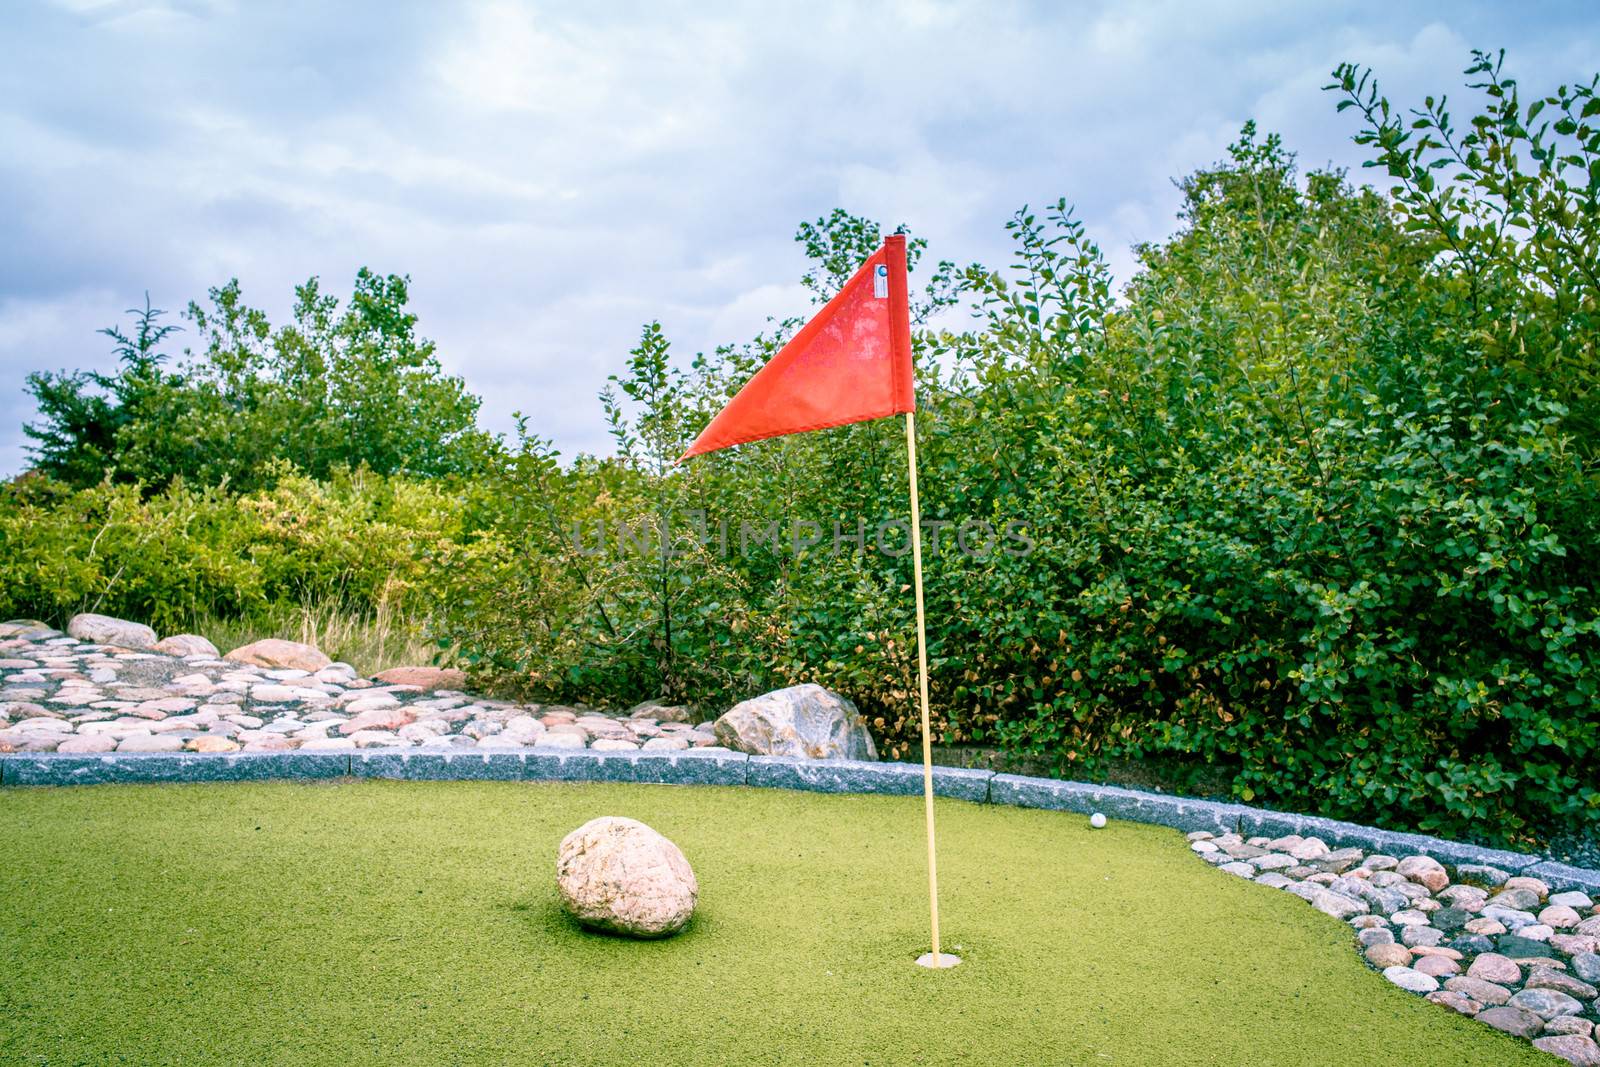 Large minigolf cource with a flag in the hole